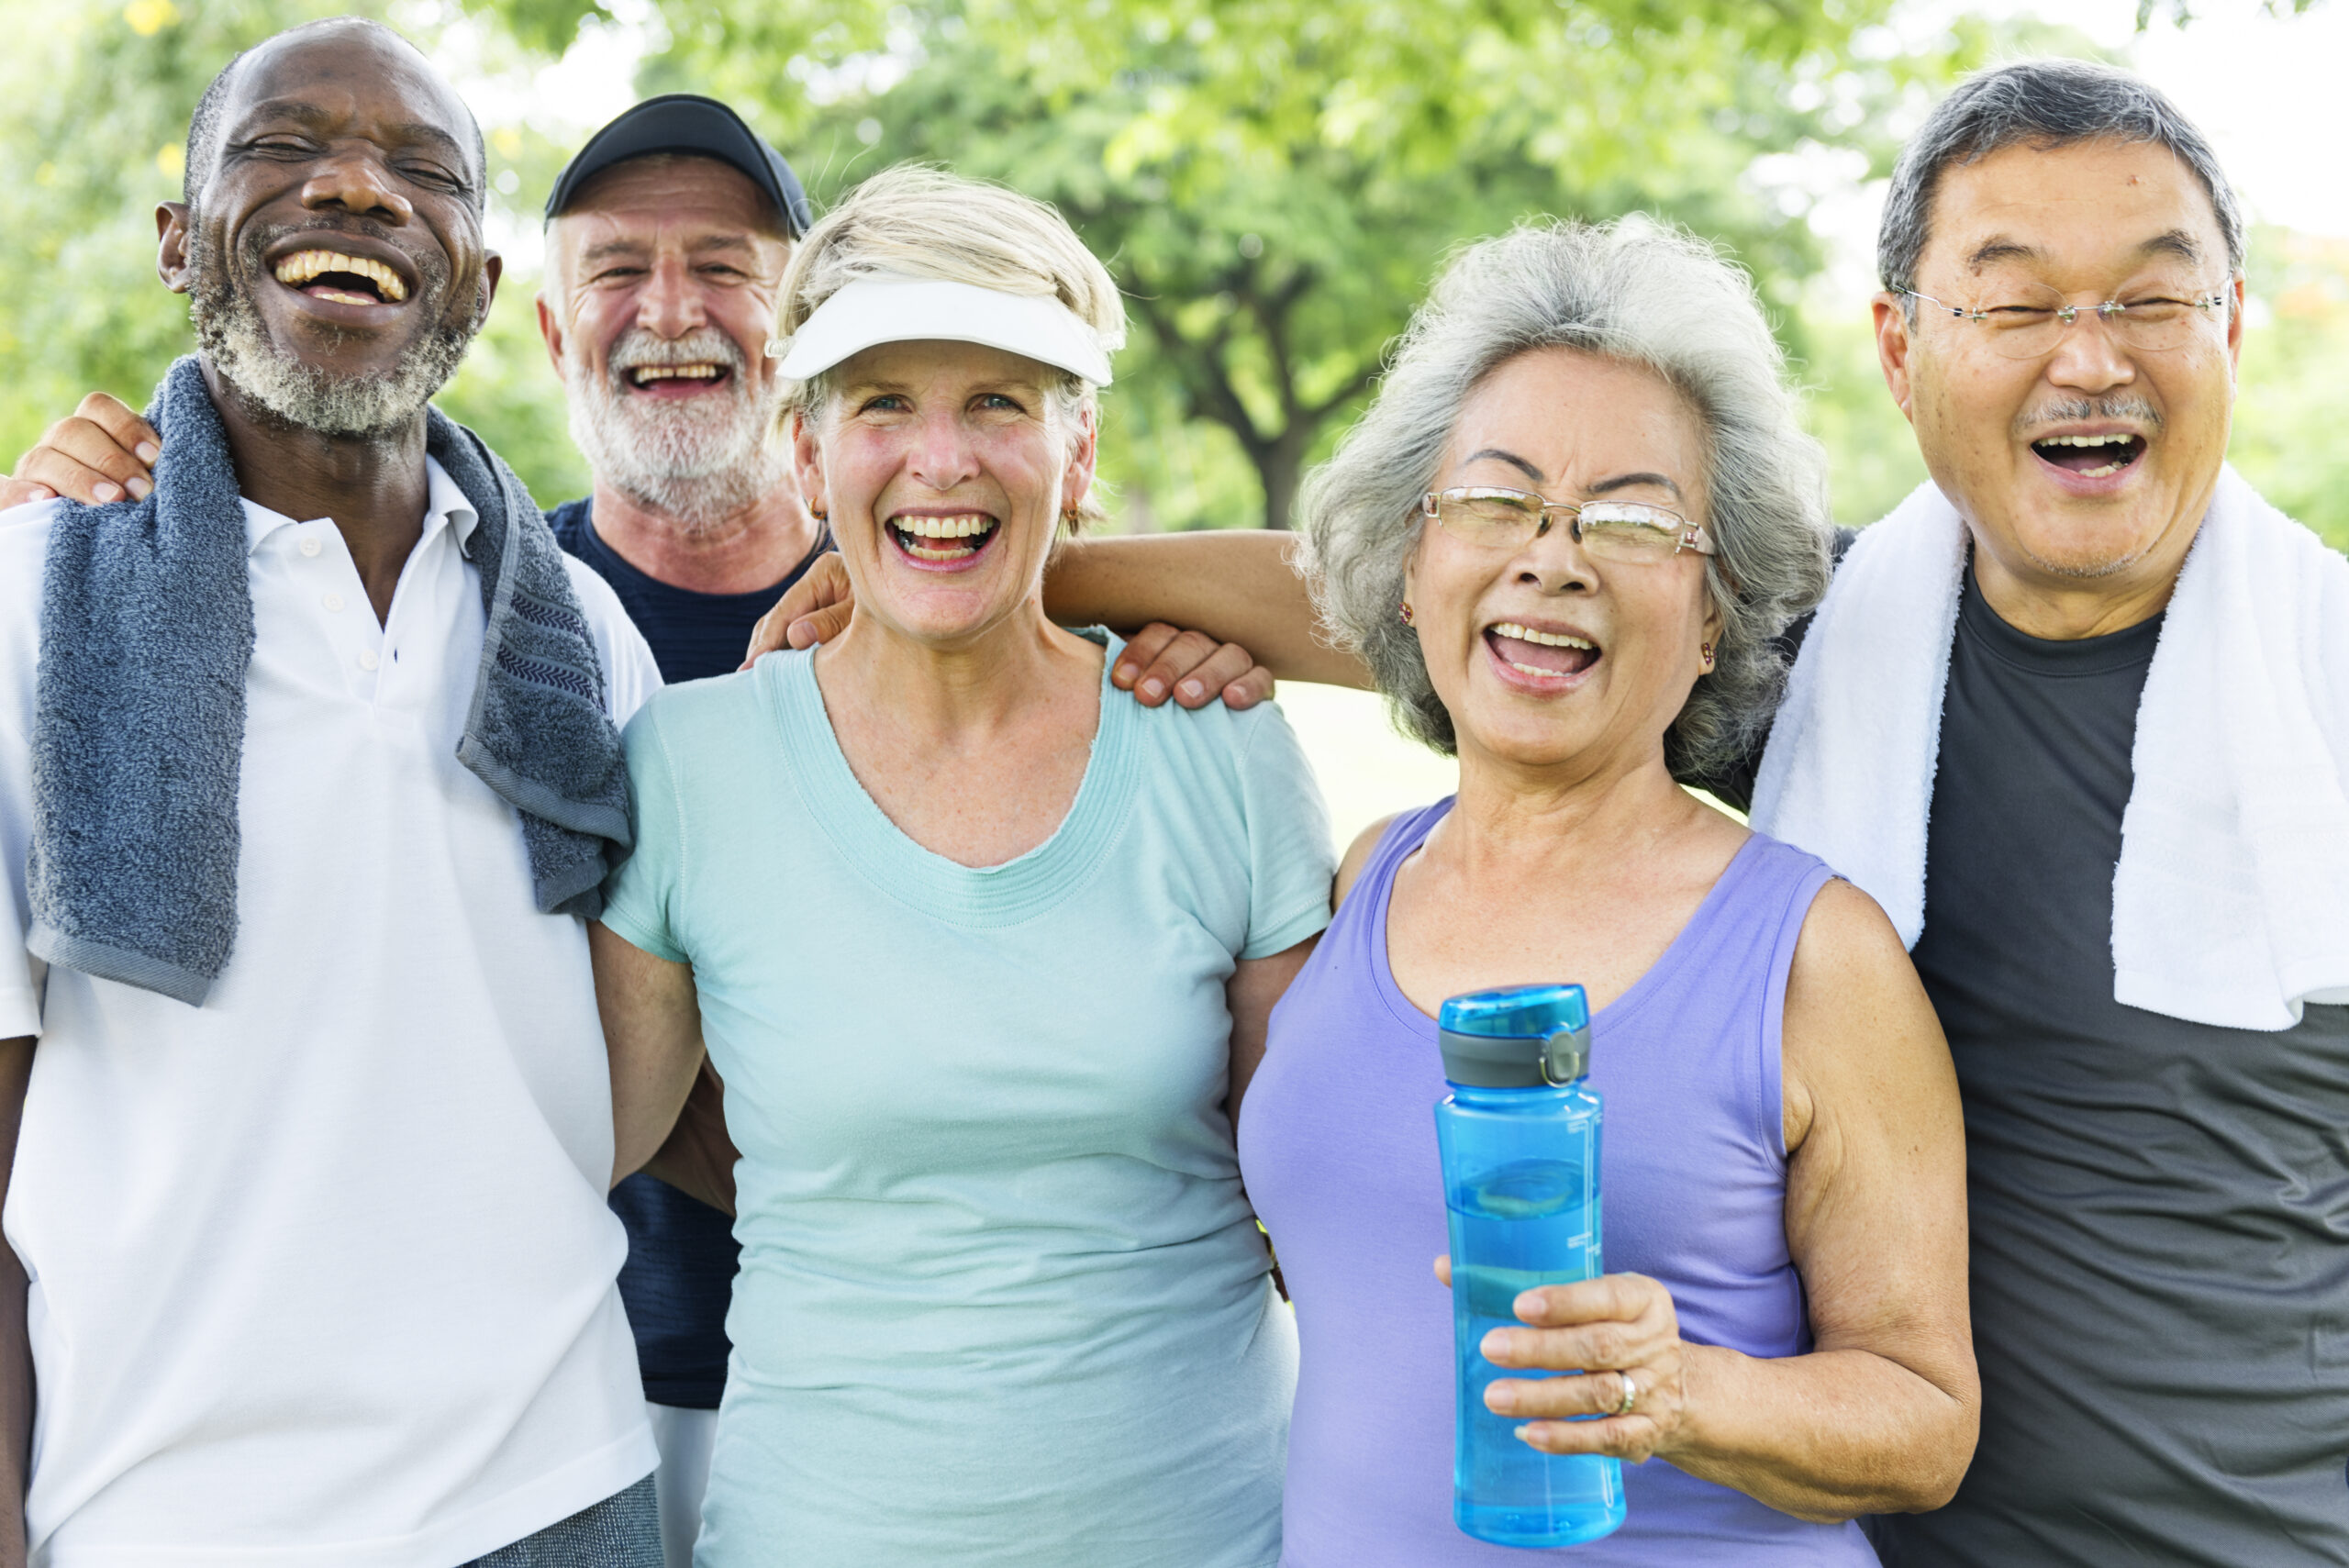 The photo shows a group of five seniors in exercise clothes who look happy.